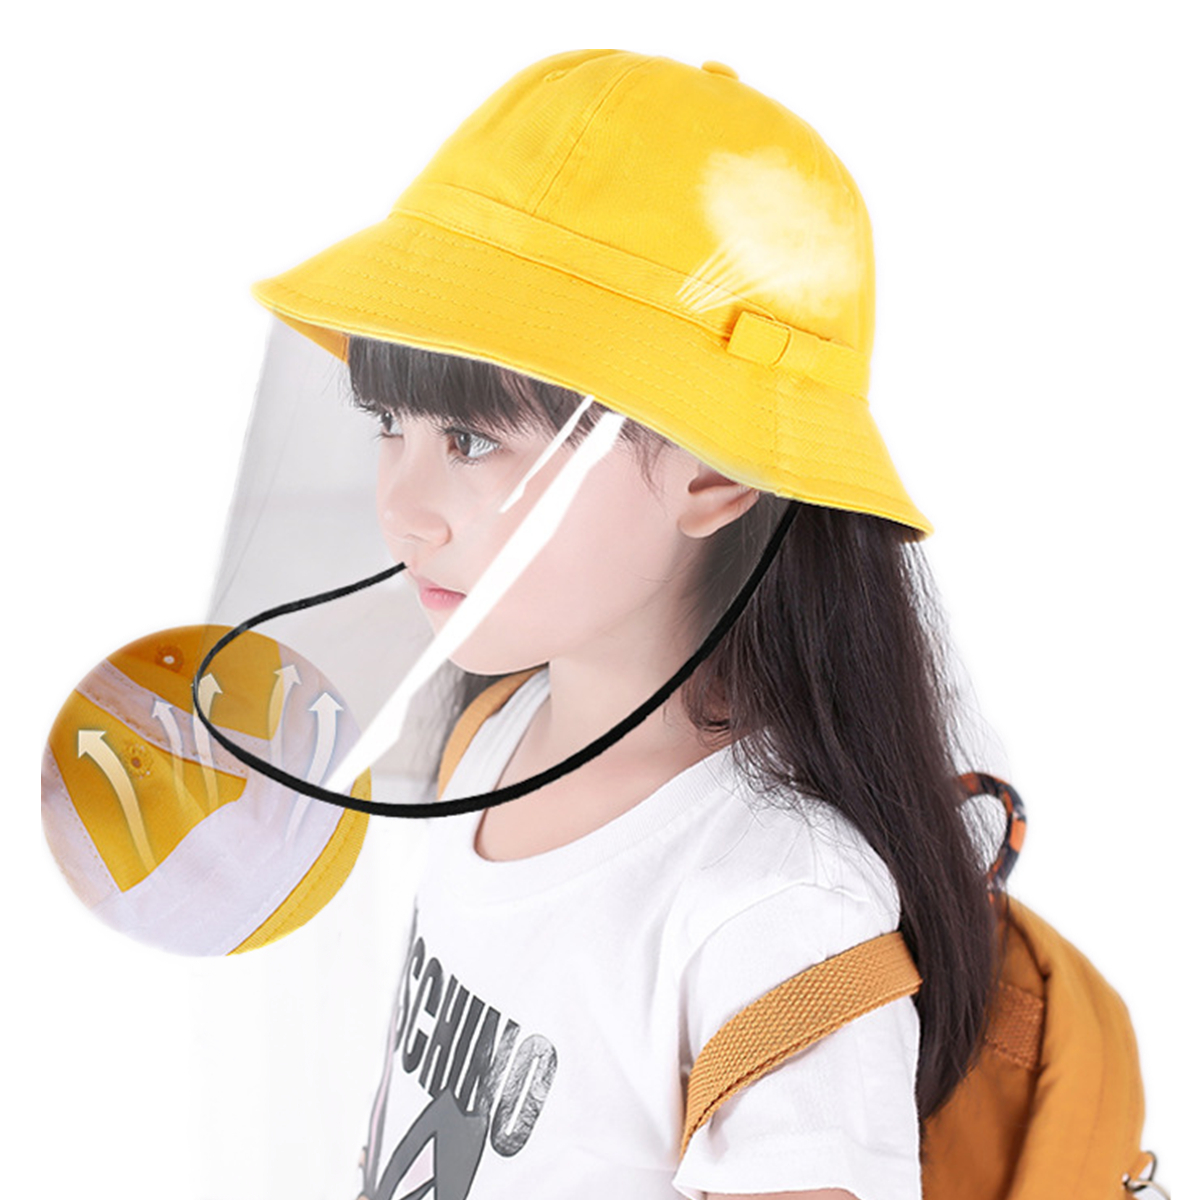 PODOM-Kids-Bucket-Hat-Protection-Safety-Removable-Full-Face-Shield-Protective-Cover-Sun-Fisherman-Ha-1676649-2